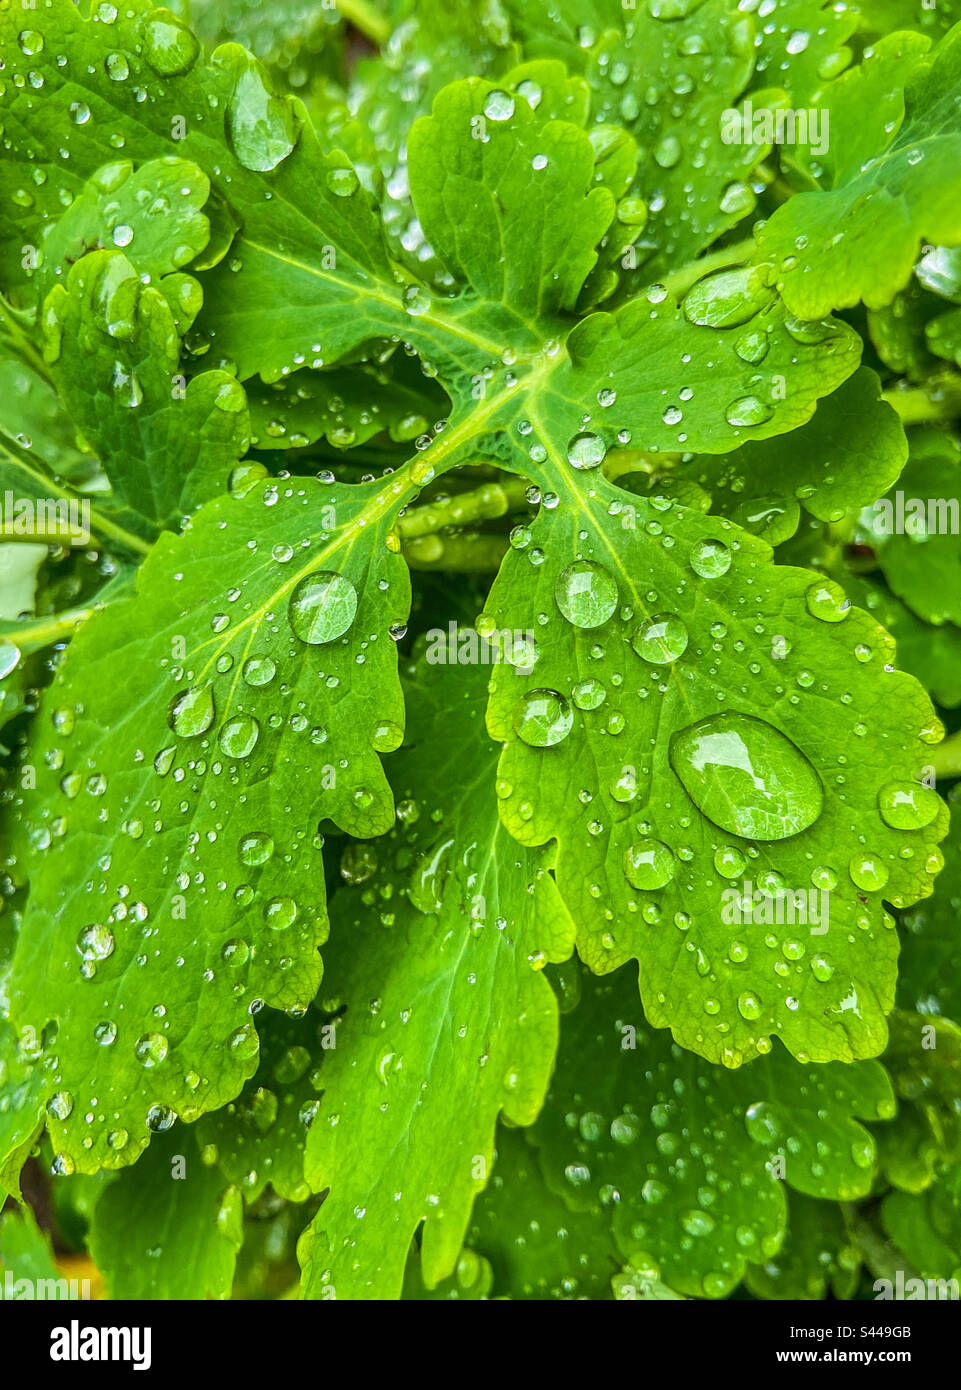 Green leaves with water droplets natural background, celandine. Stock Photo